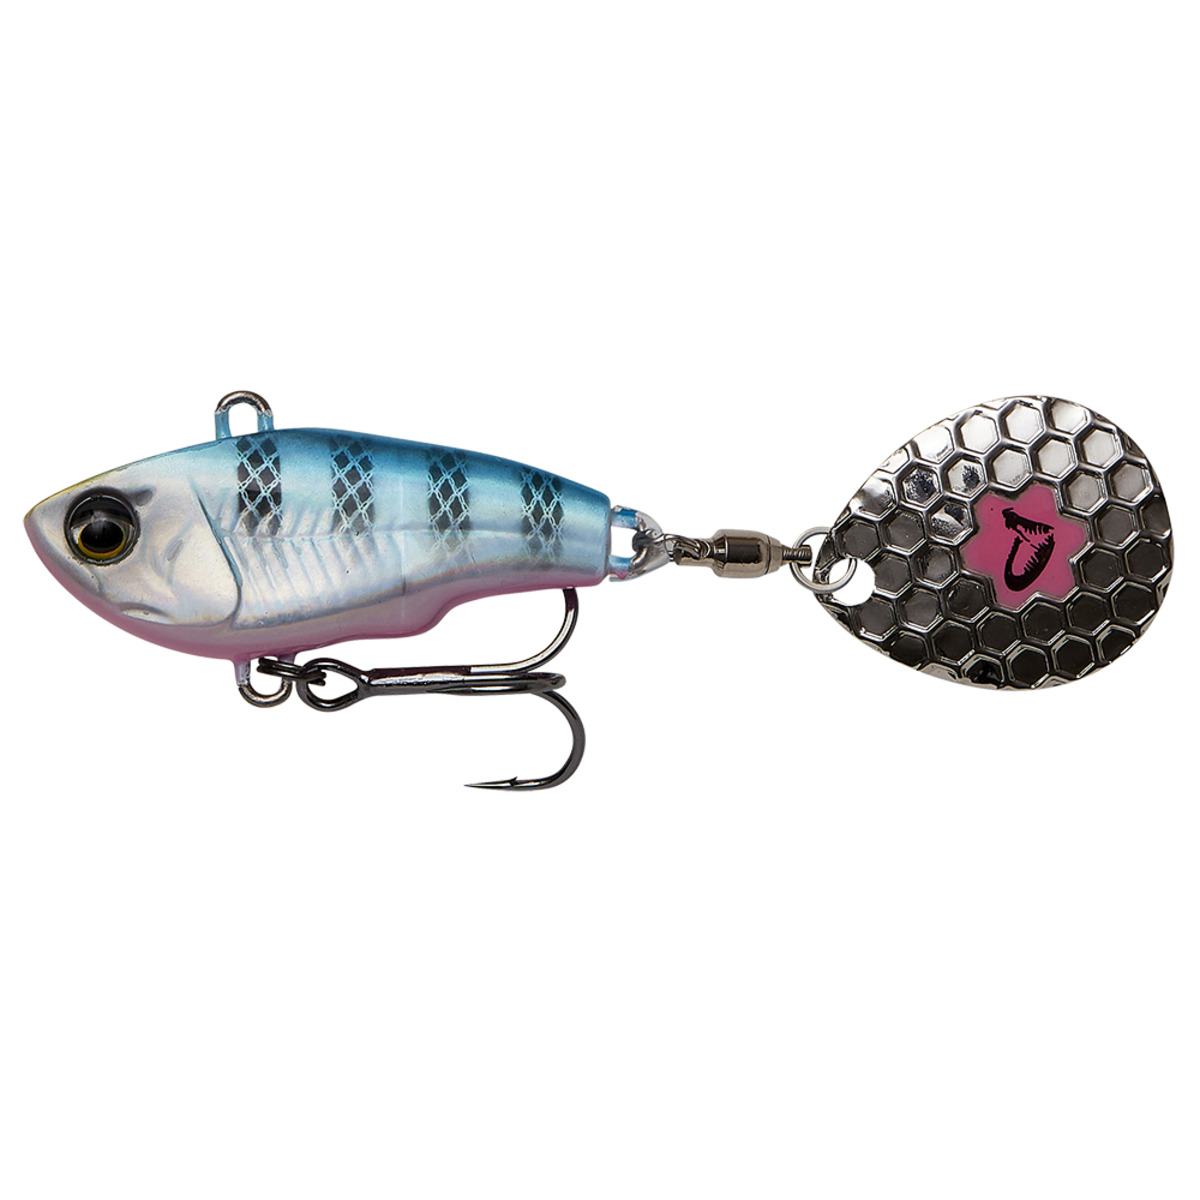 Savage Gear Fat Tail Spin 8cm 24g Sinking - BLUE SILVER PINK